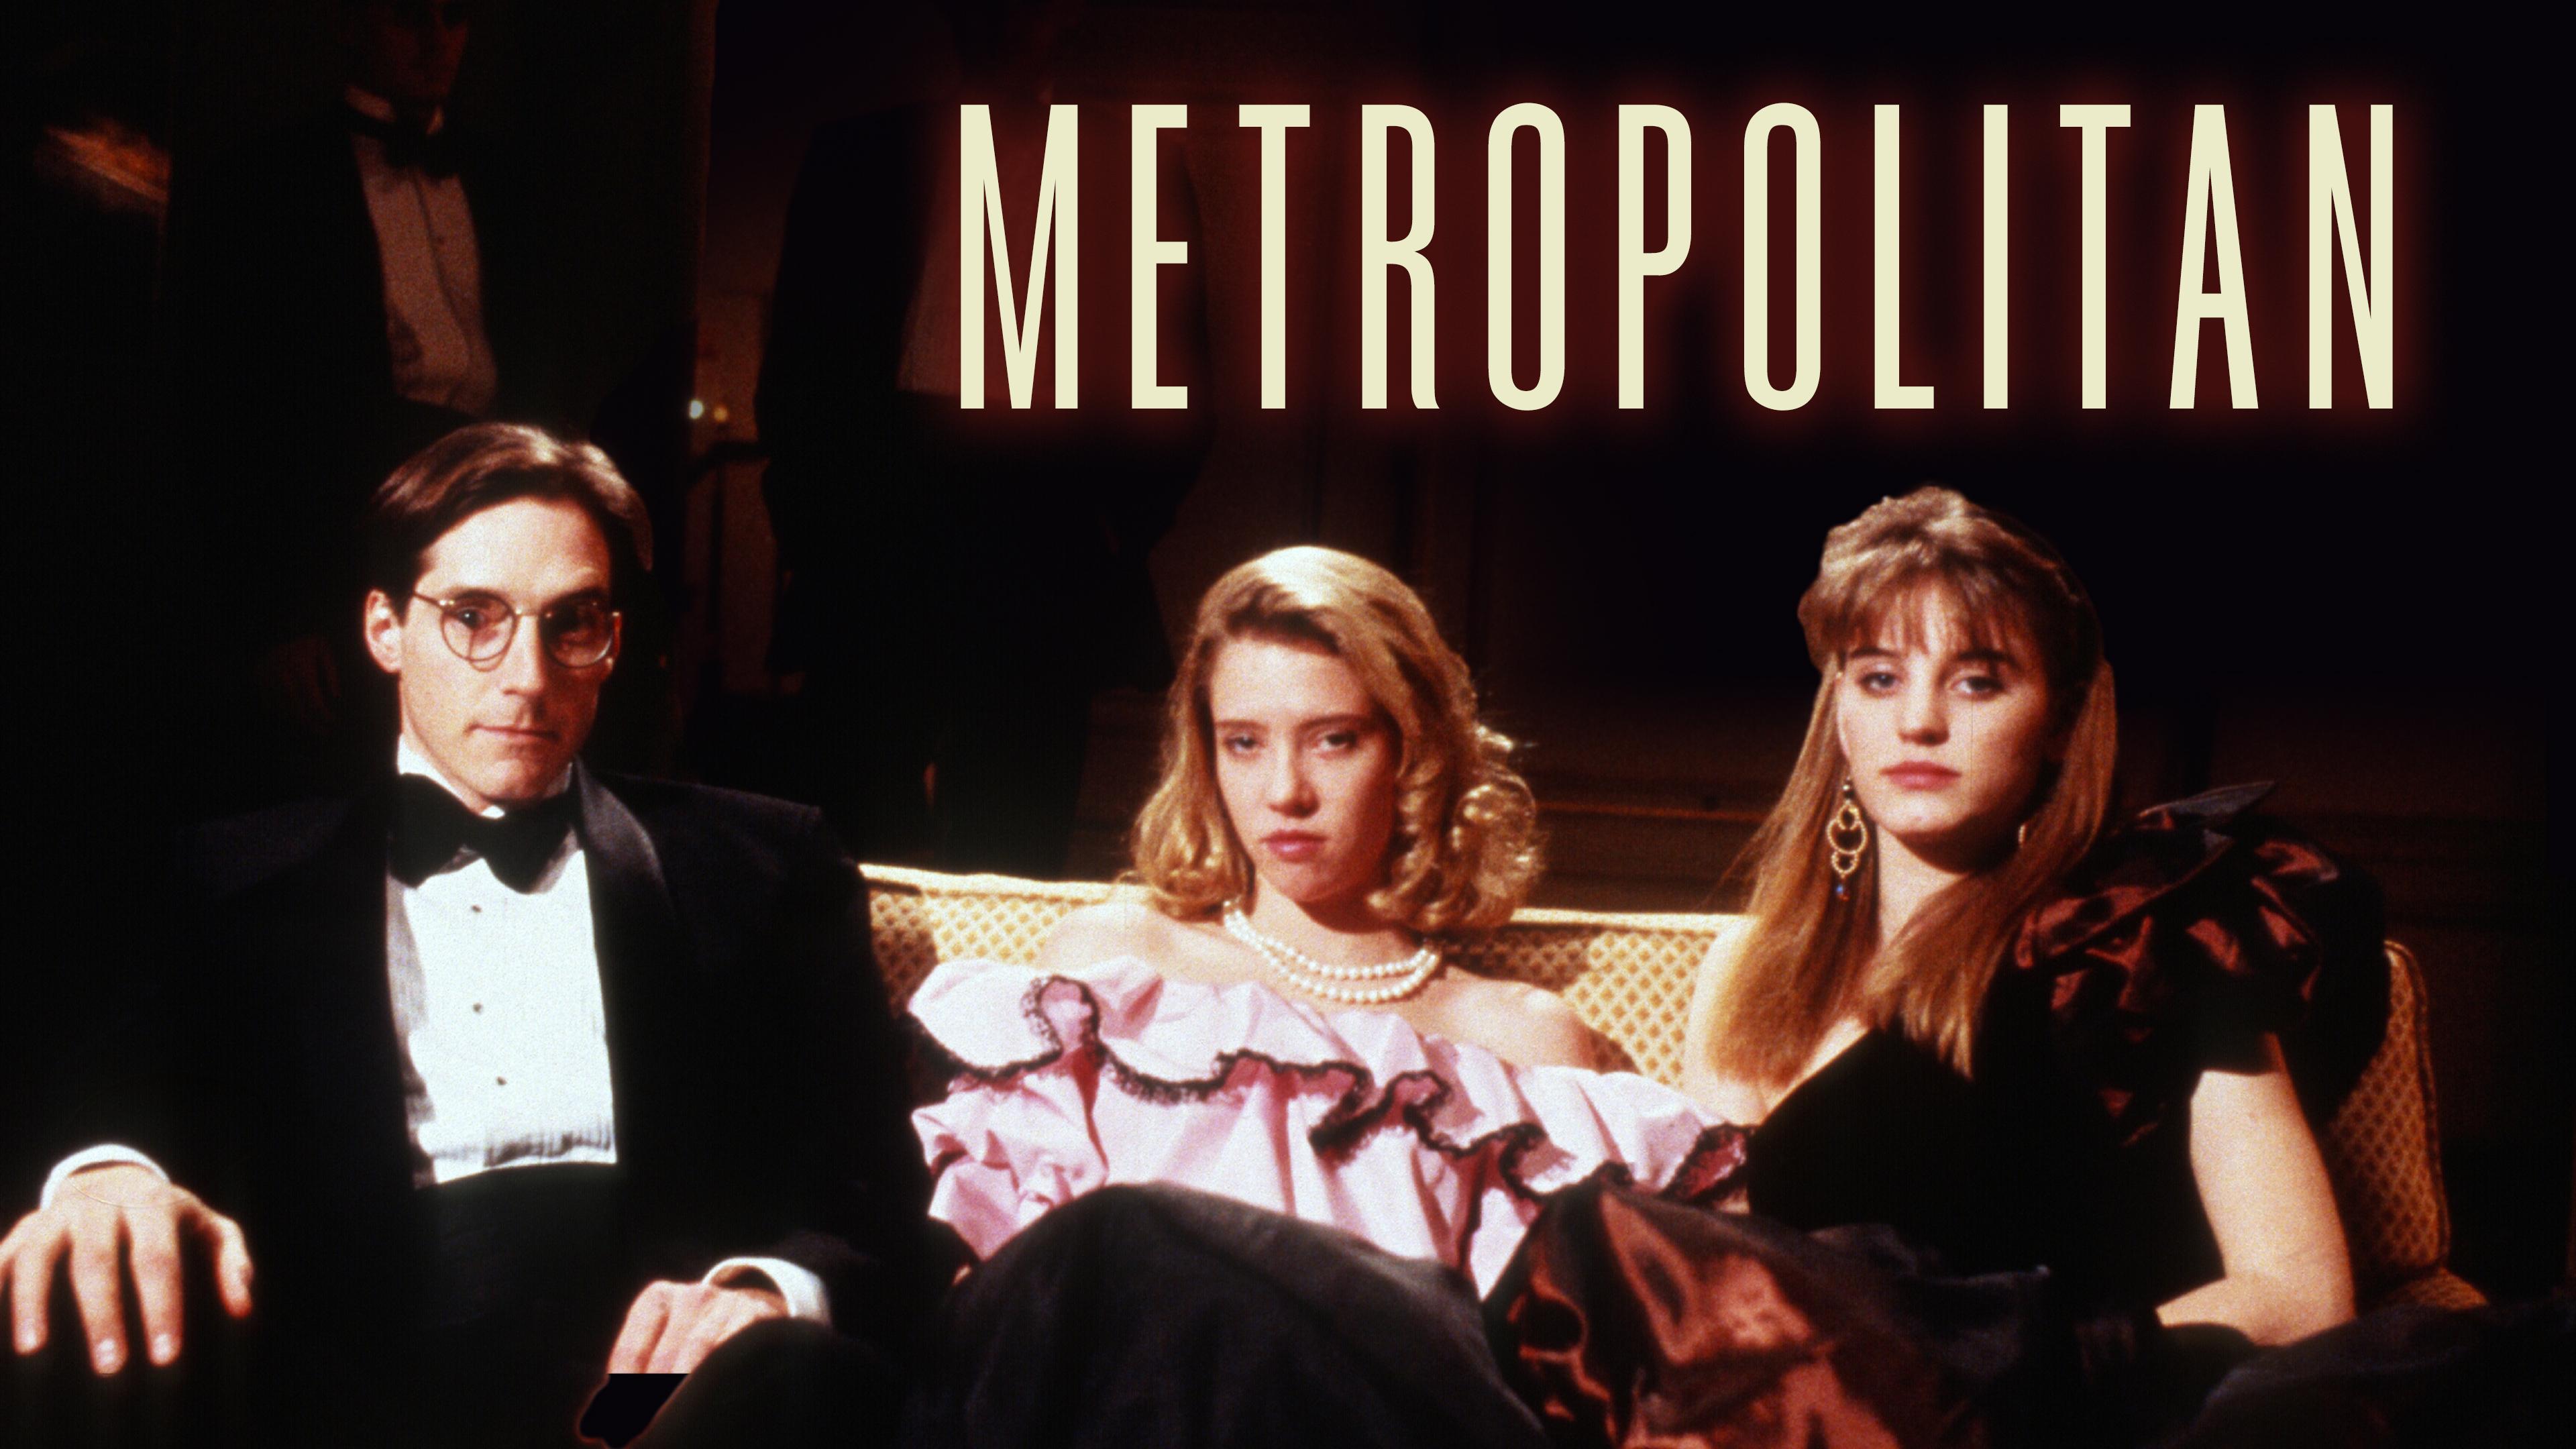 50-facts-about-the-movie-metropolitan